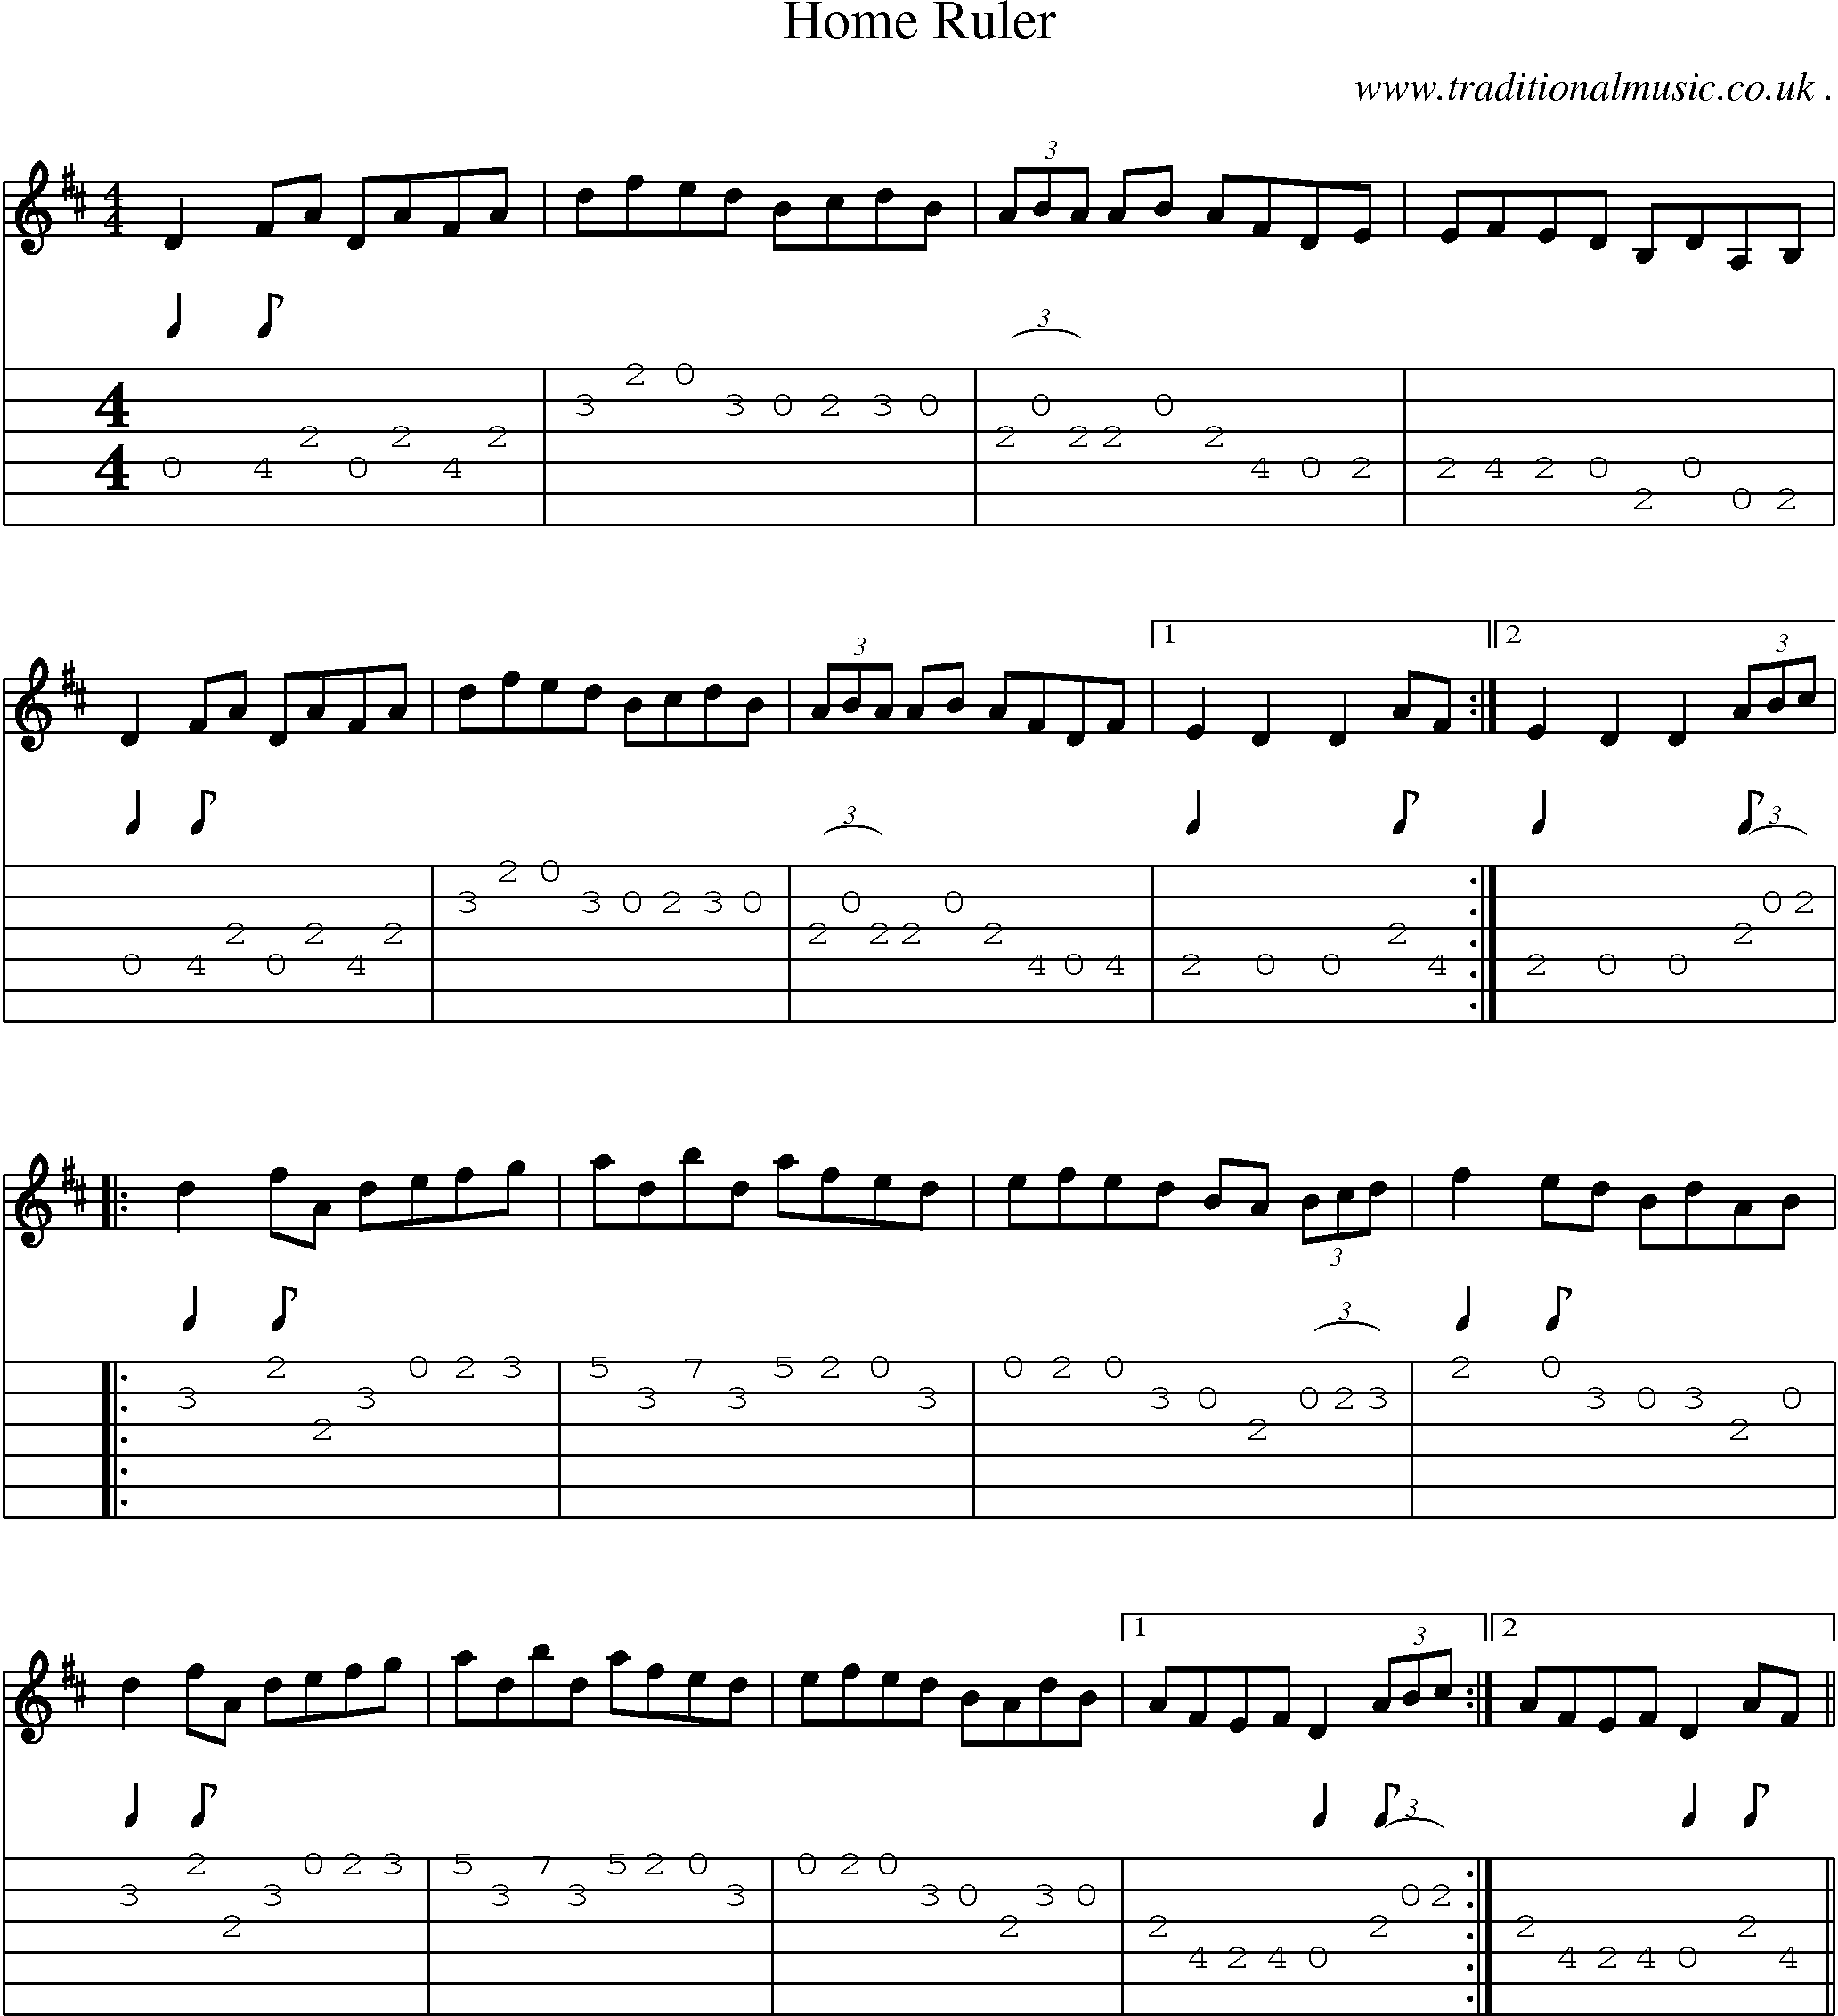 Sheet-Music and Guitar Tabs for Home Ruler